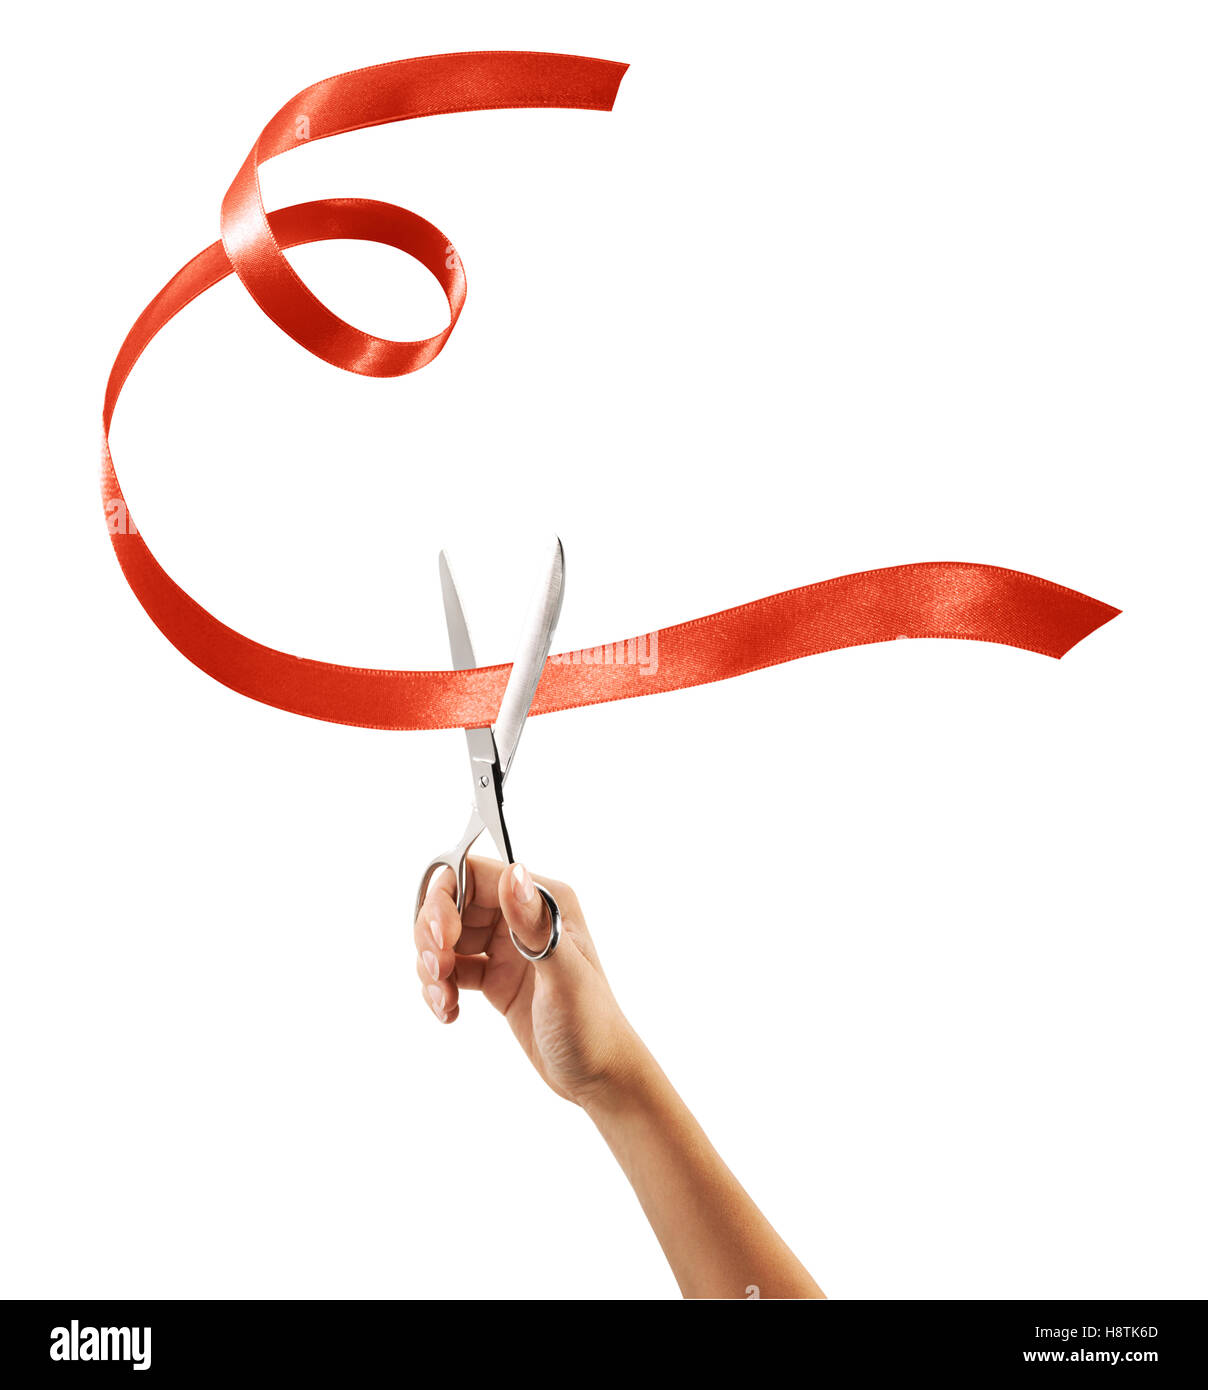 Scissors cutting through red ribbon or tape, isolated on white. Stock Photo